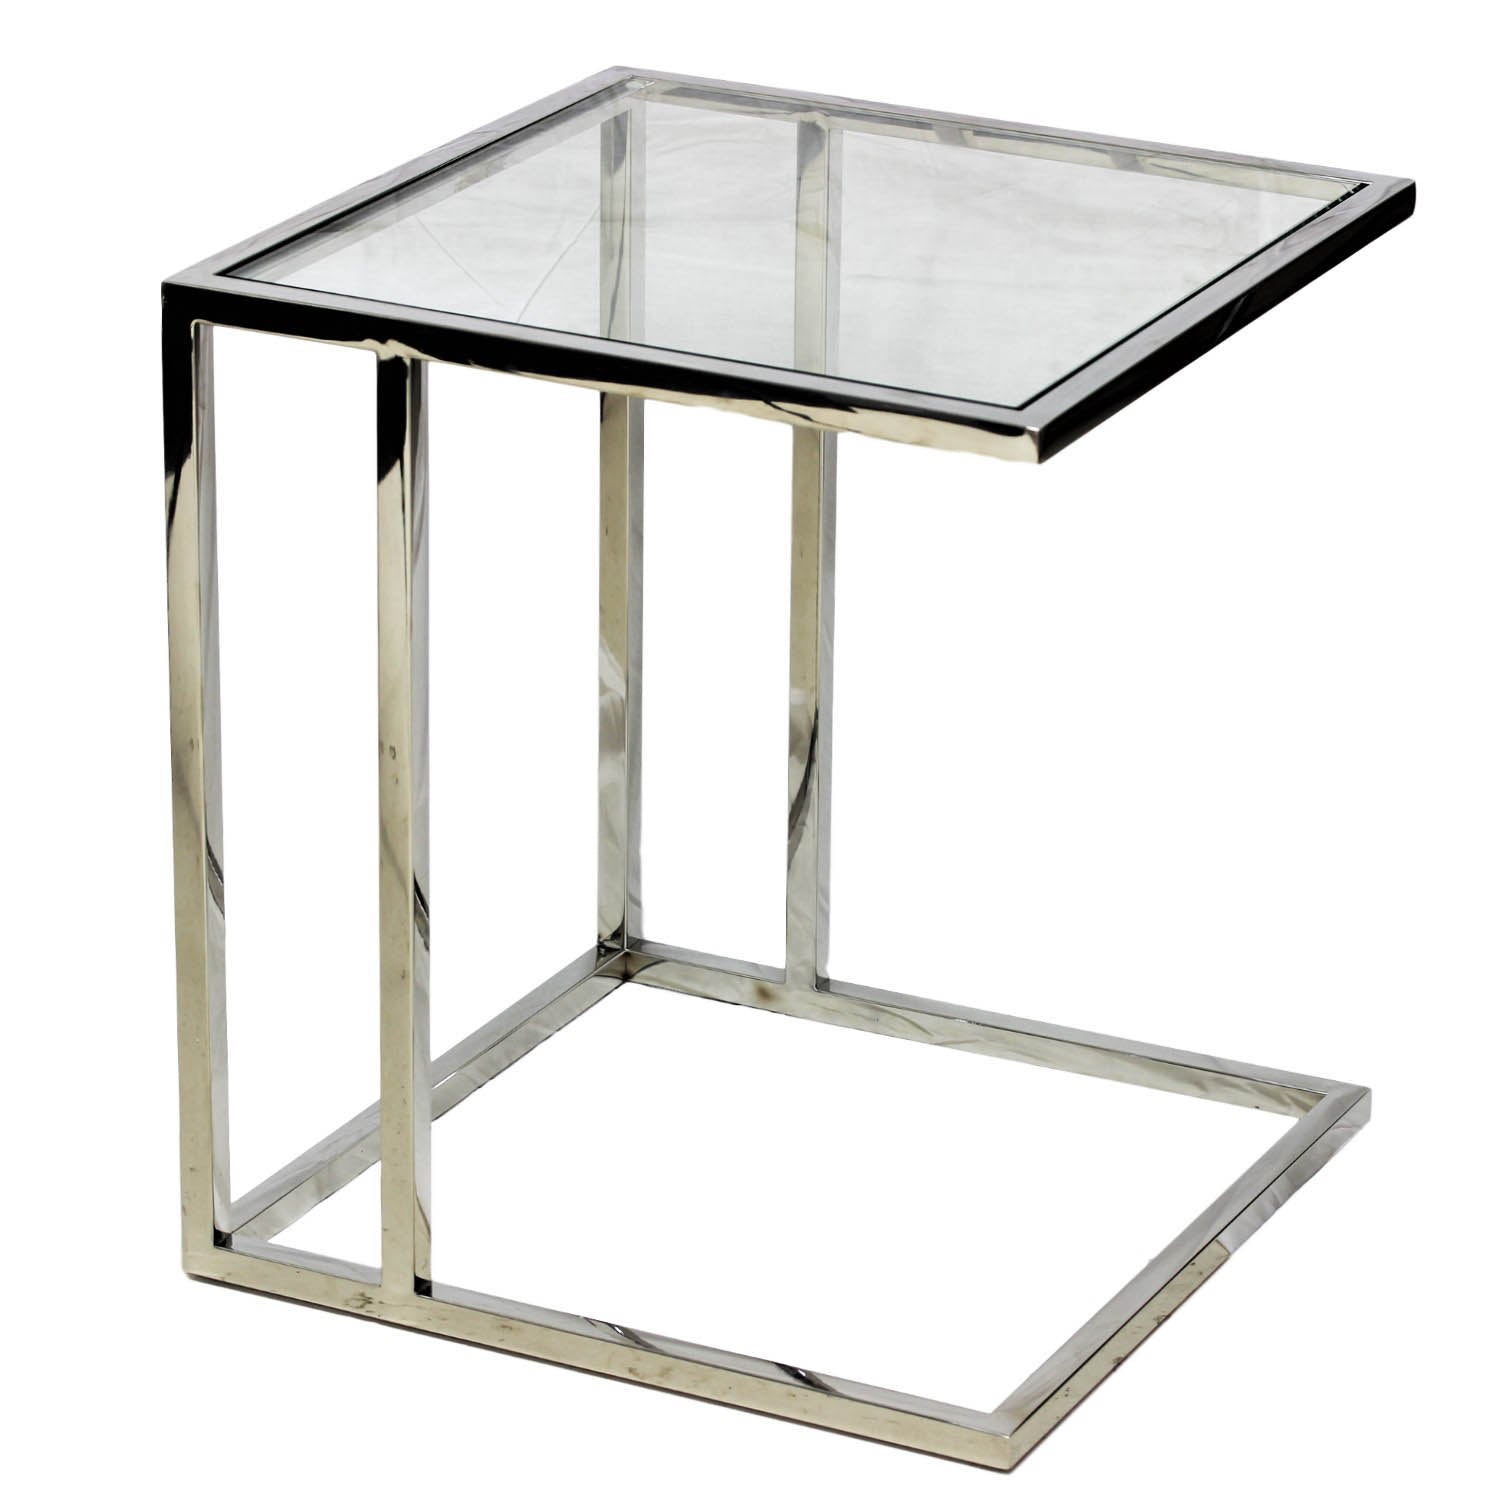 Stainless Steel Sofa Table Toughened Glass Top